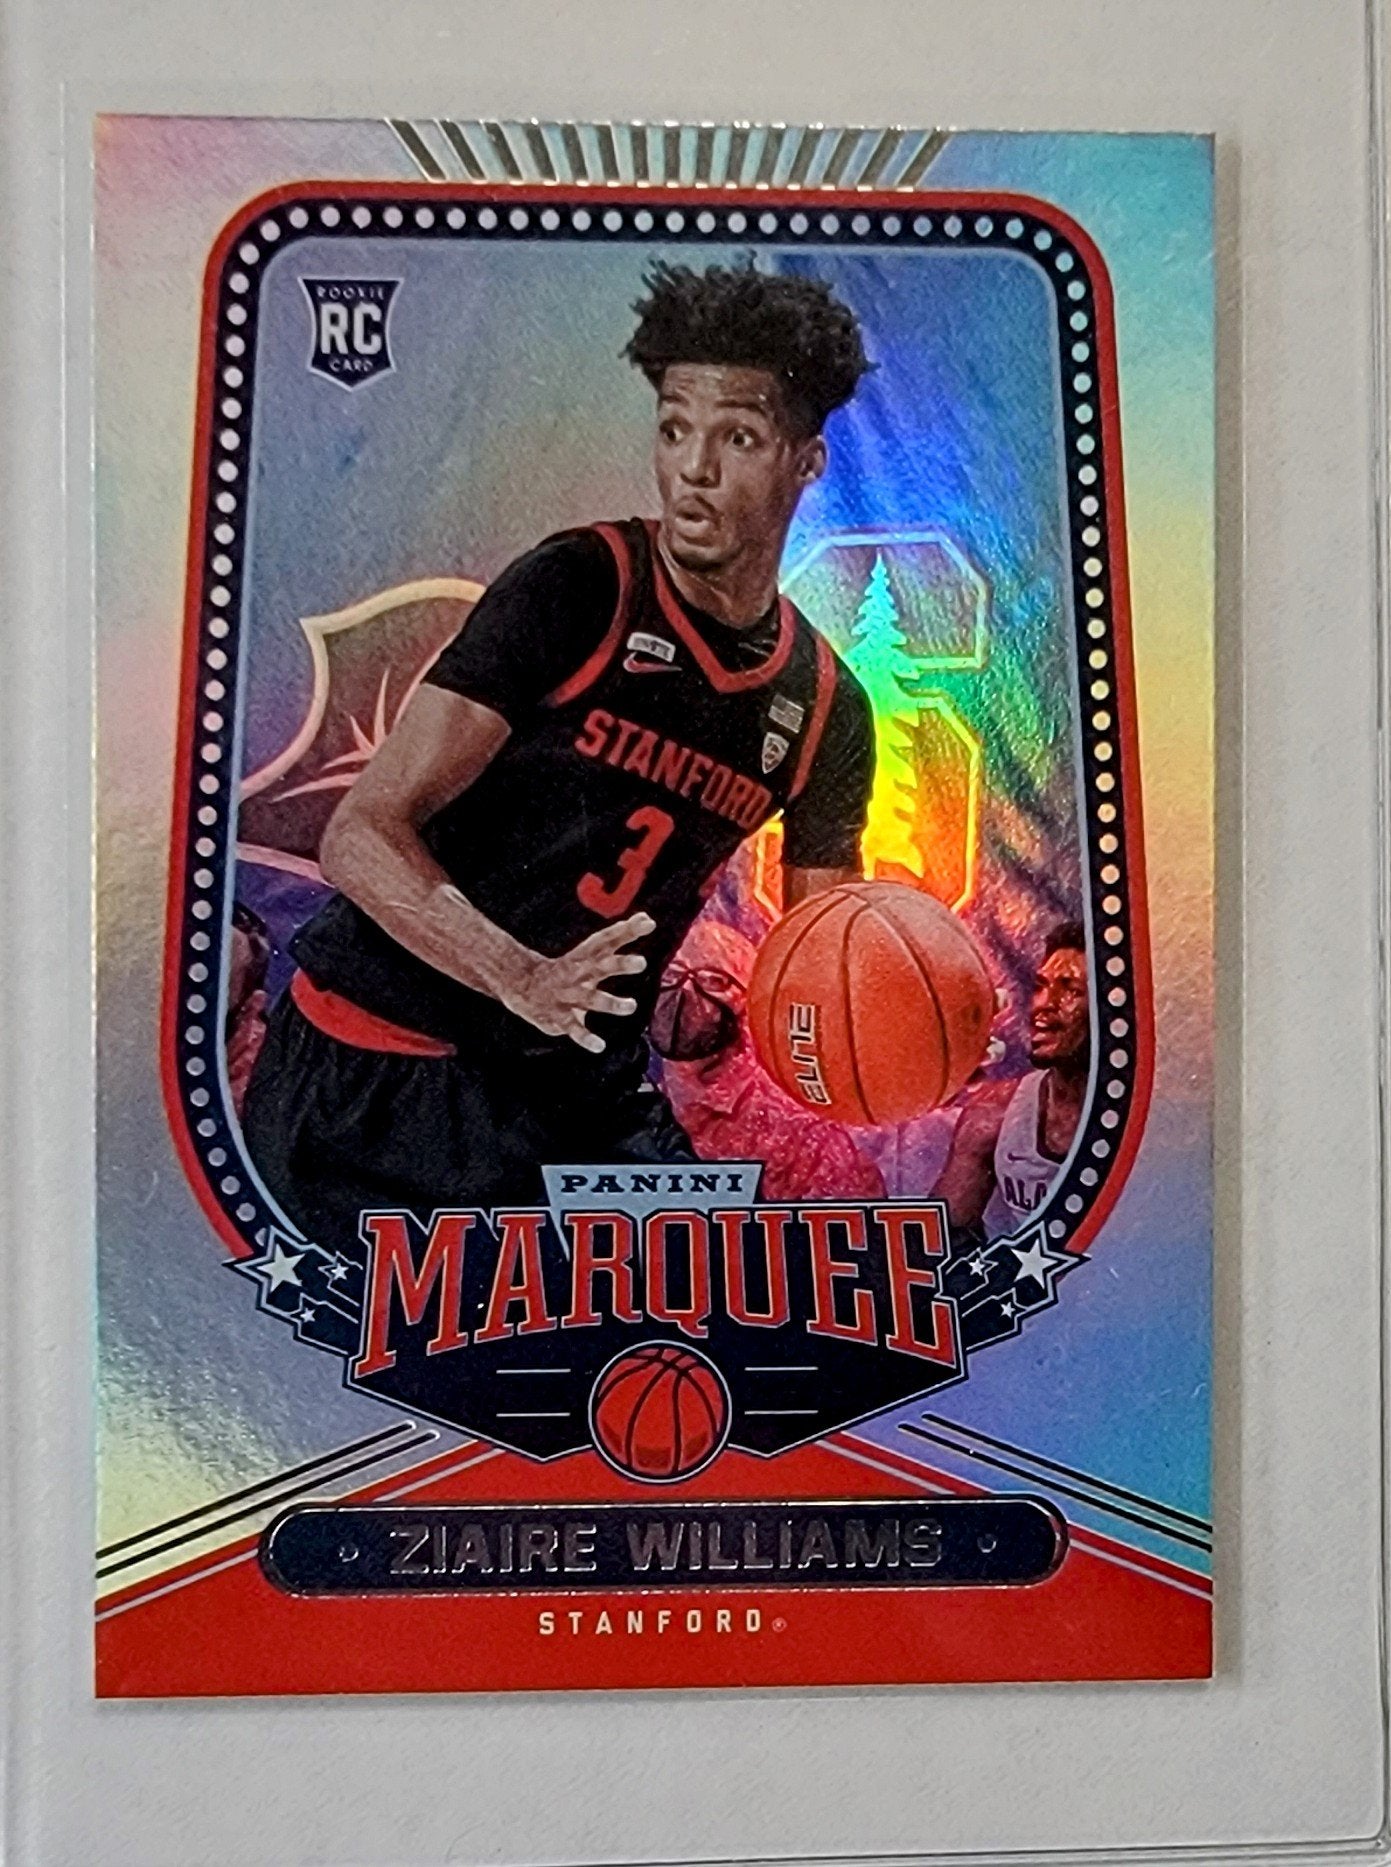 2021 Panini Chronicles Draft Picks Zaire Williams Marquee Rookie Refractor Basketball Card AVM1 simple Xclusive Collectibles   